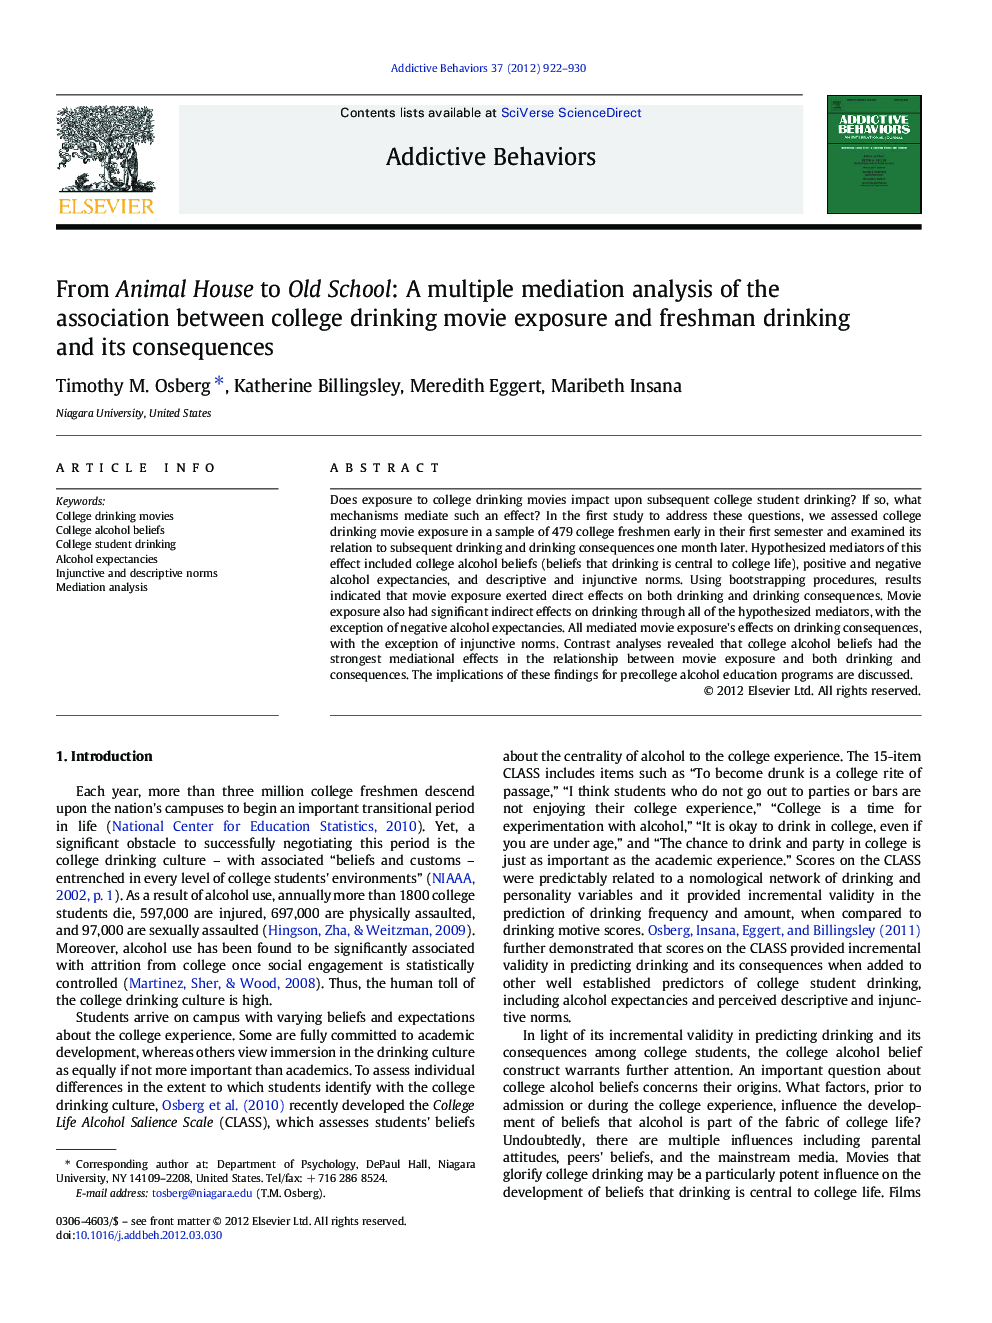 From Animal House to Old School: A multiple mediation analysis of the association between college drinking movie exposure and freshman drinking and its consequences